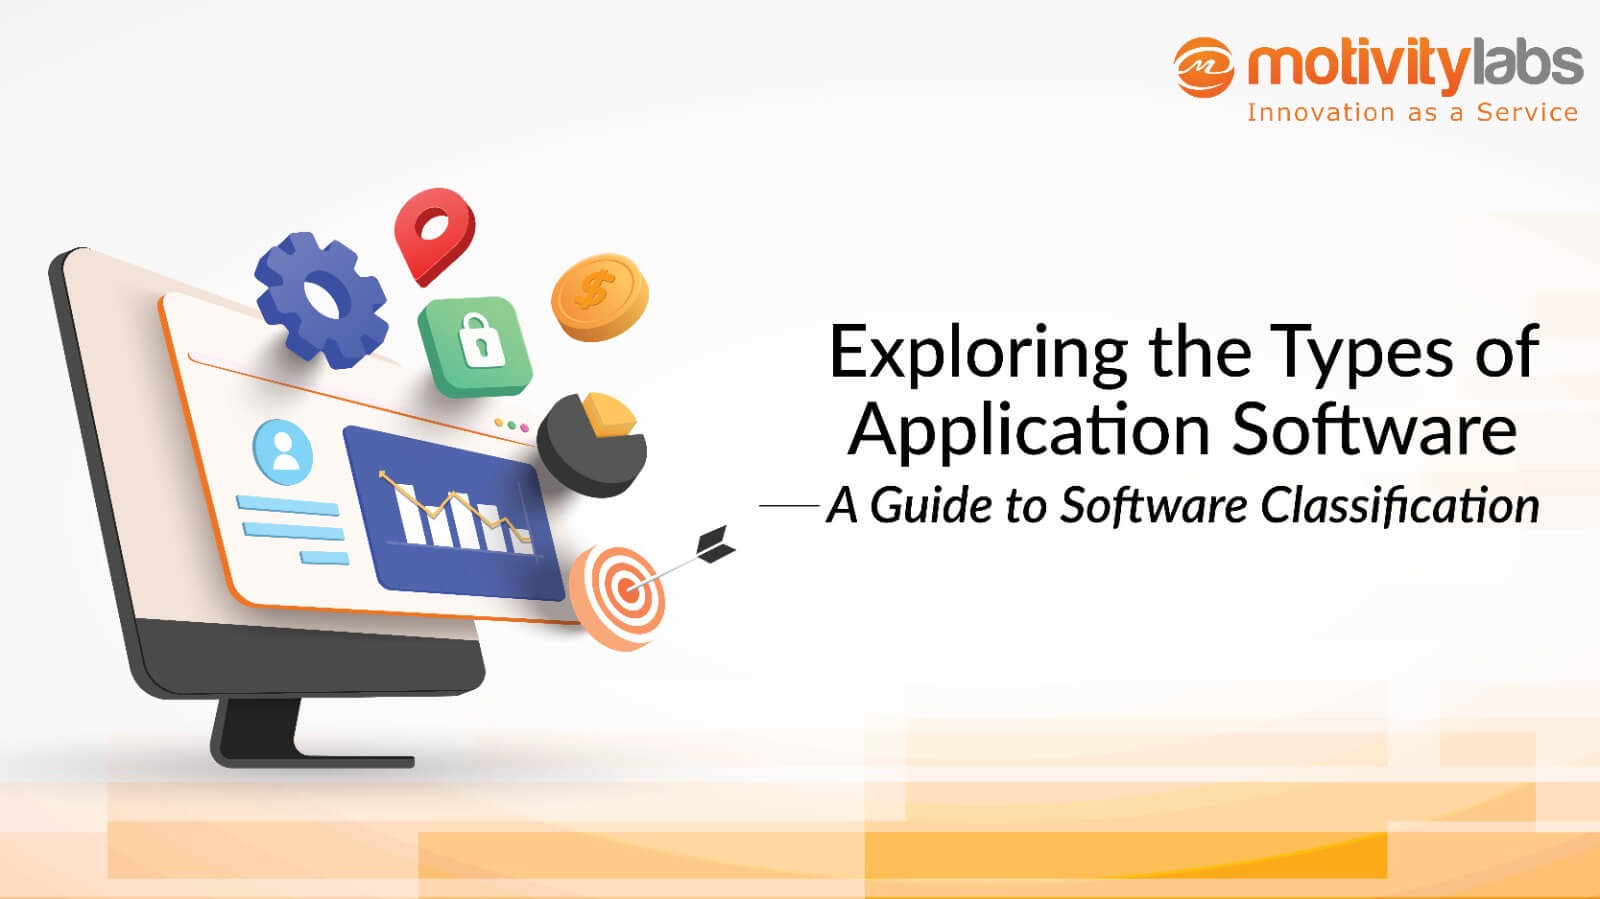 Exploring the Types of Application Software: A Guide to Software Classification